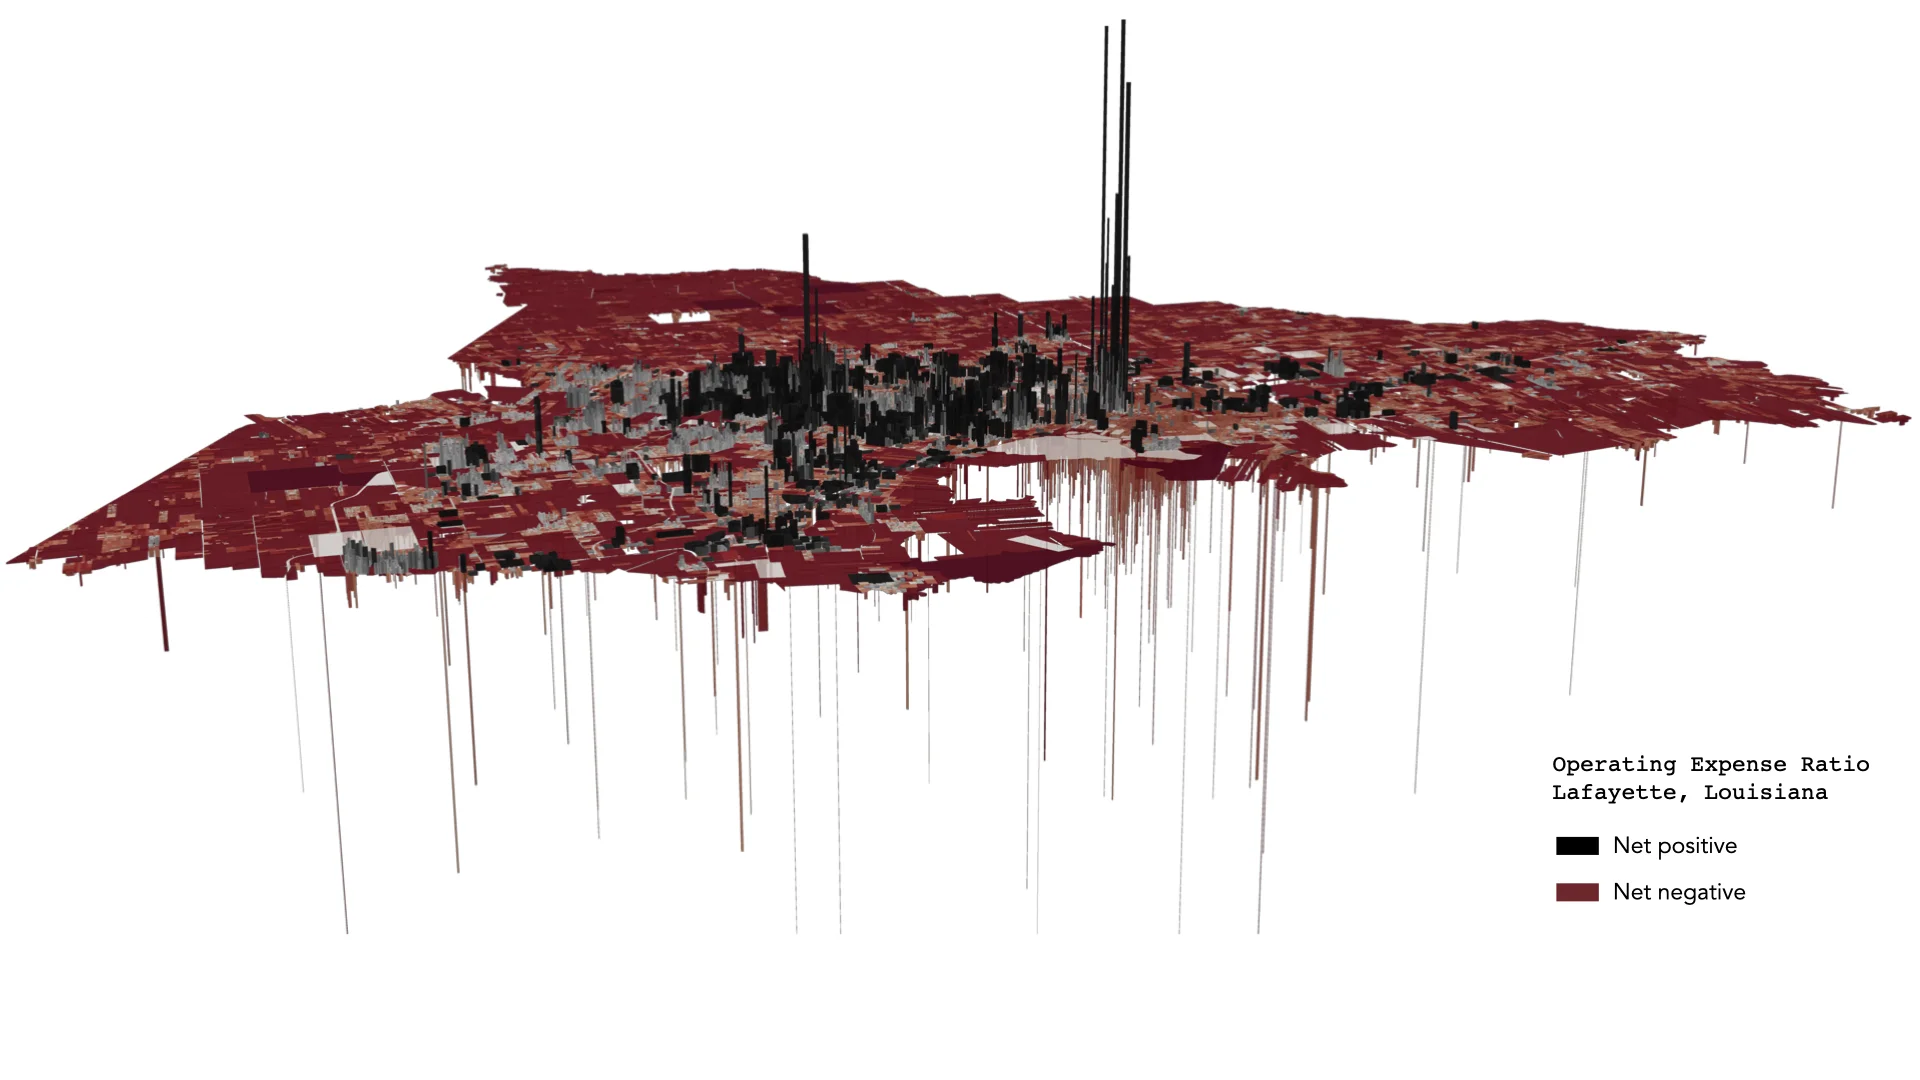 A map of all the parcels of land within Lafayette, LA. Each is colored based on whether it is a net positive or net negative for the city. 3D bars of varying heights indicate how much money is being gained/lost. The highest density of positive bars are in downtown, while the negative bars are scattered about the outskirts of the city. There are more negative than positive bars.